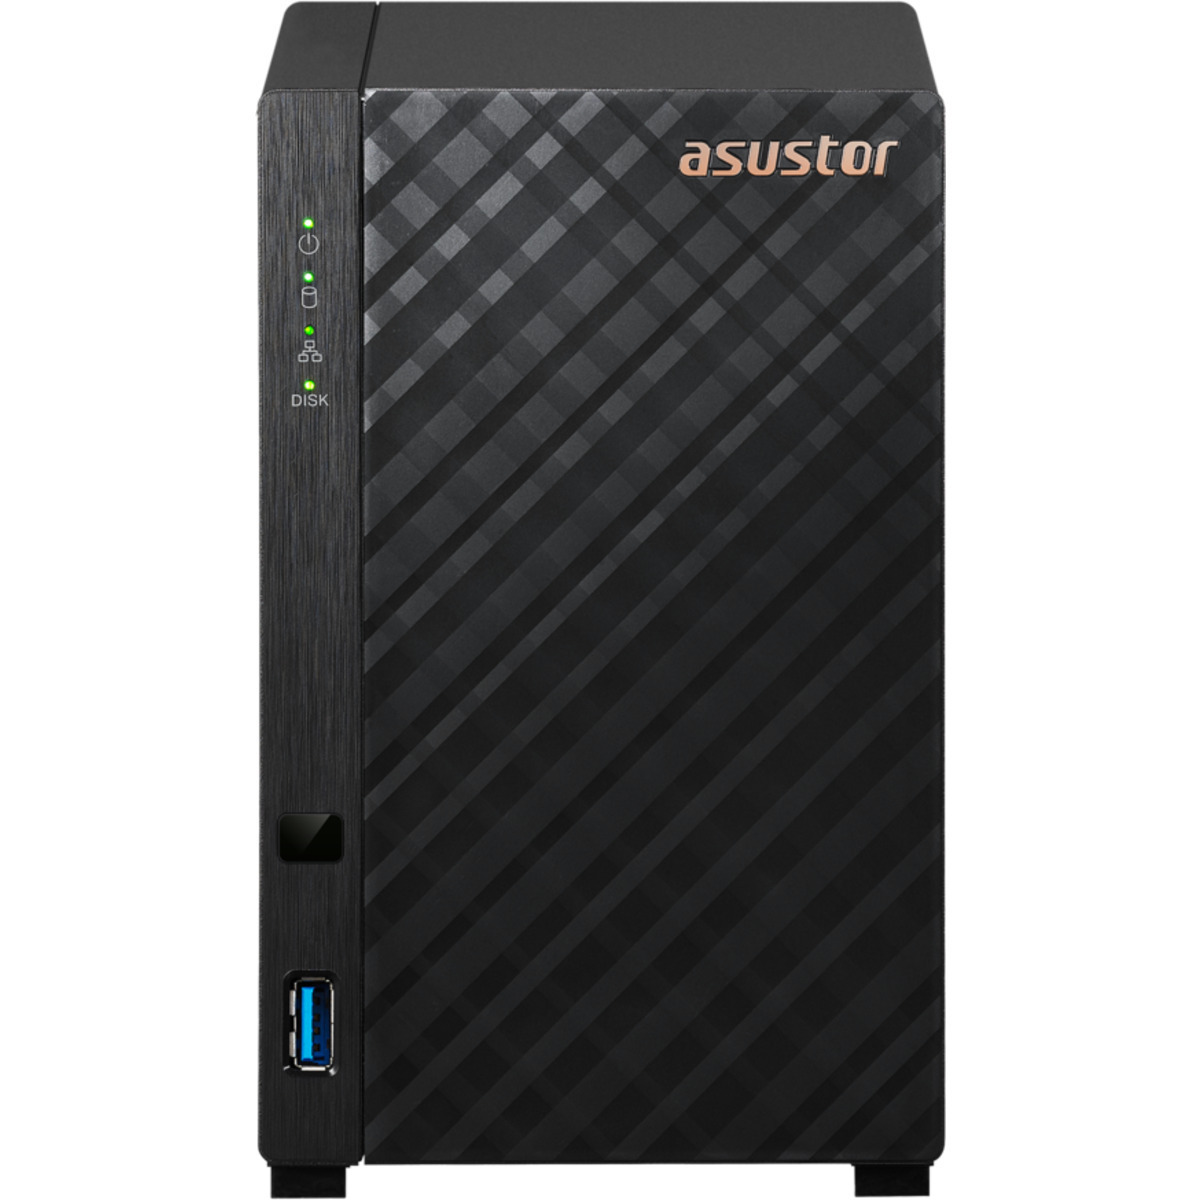 ASUSTOR DRIVESTOR 2 Lite AS1102TL 20tb 2-Bay Desktop Personal / Basic Home / Small Office NAS - Network Attached Storage Device 2x10tb Seagate IronWolf Pro ST10000NT001 3.5 7200rpm SATA 6Gb/s HDD NAS Class Drives Installed - Burn-In Tested - ON SALE DRIVESTOR 2 Lite AS1102TL